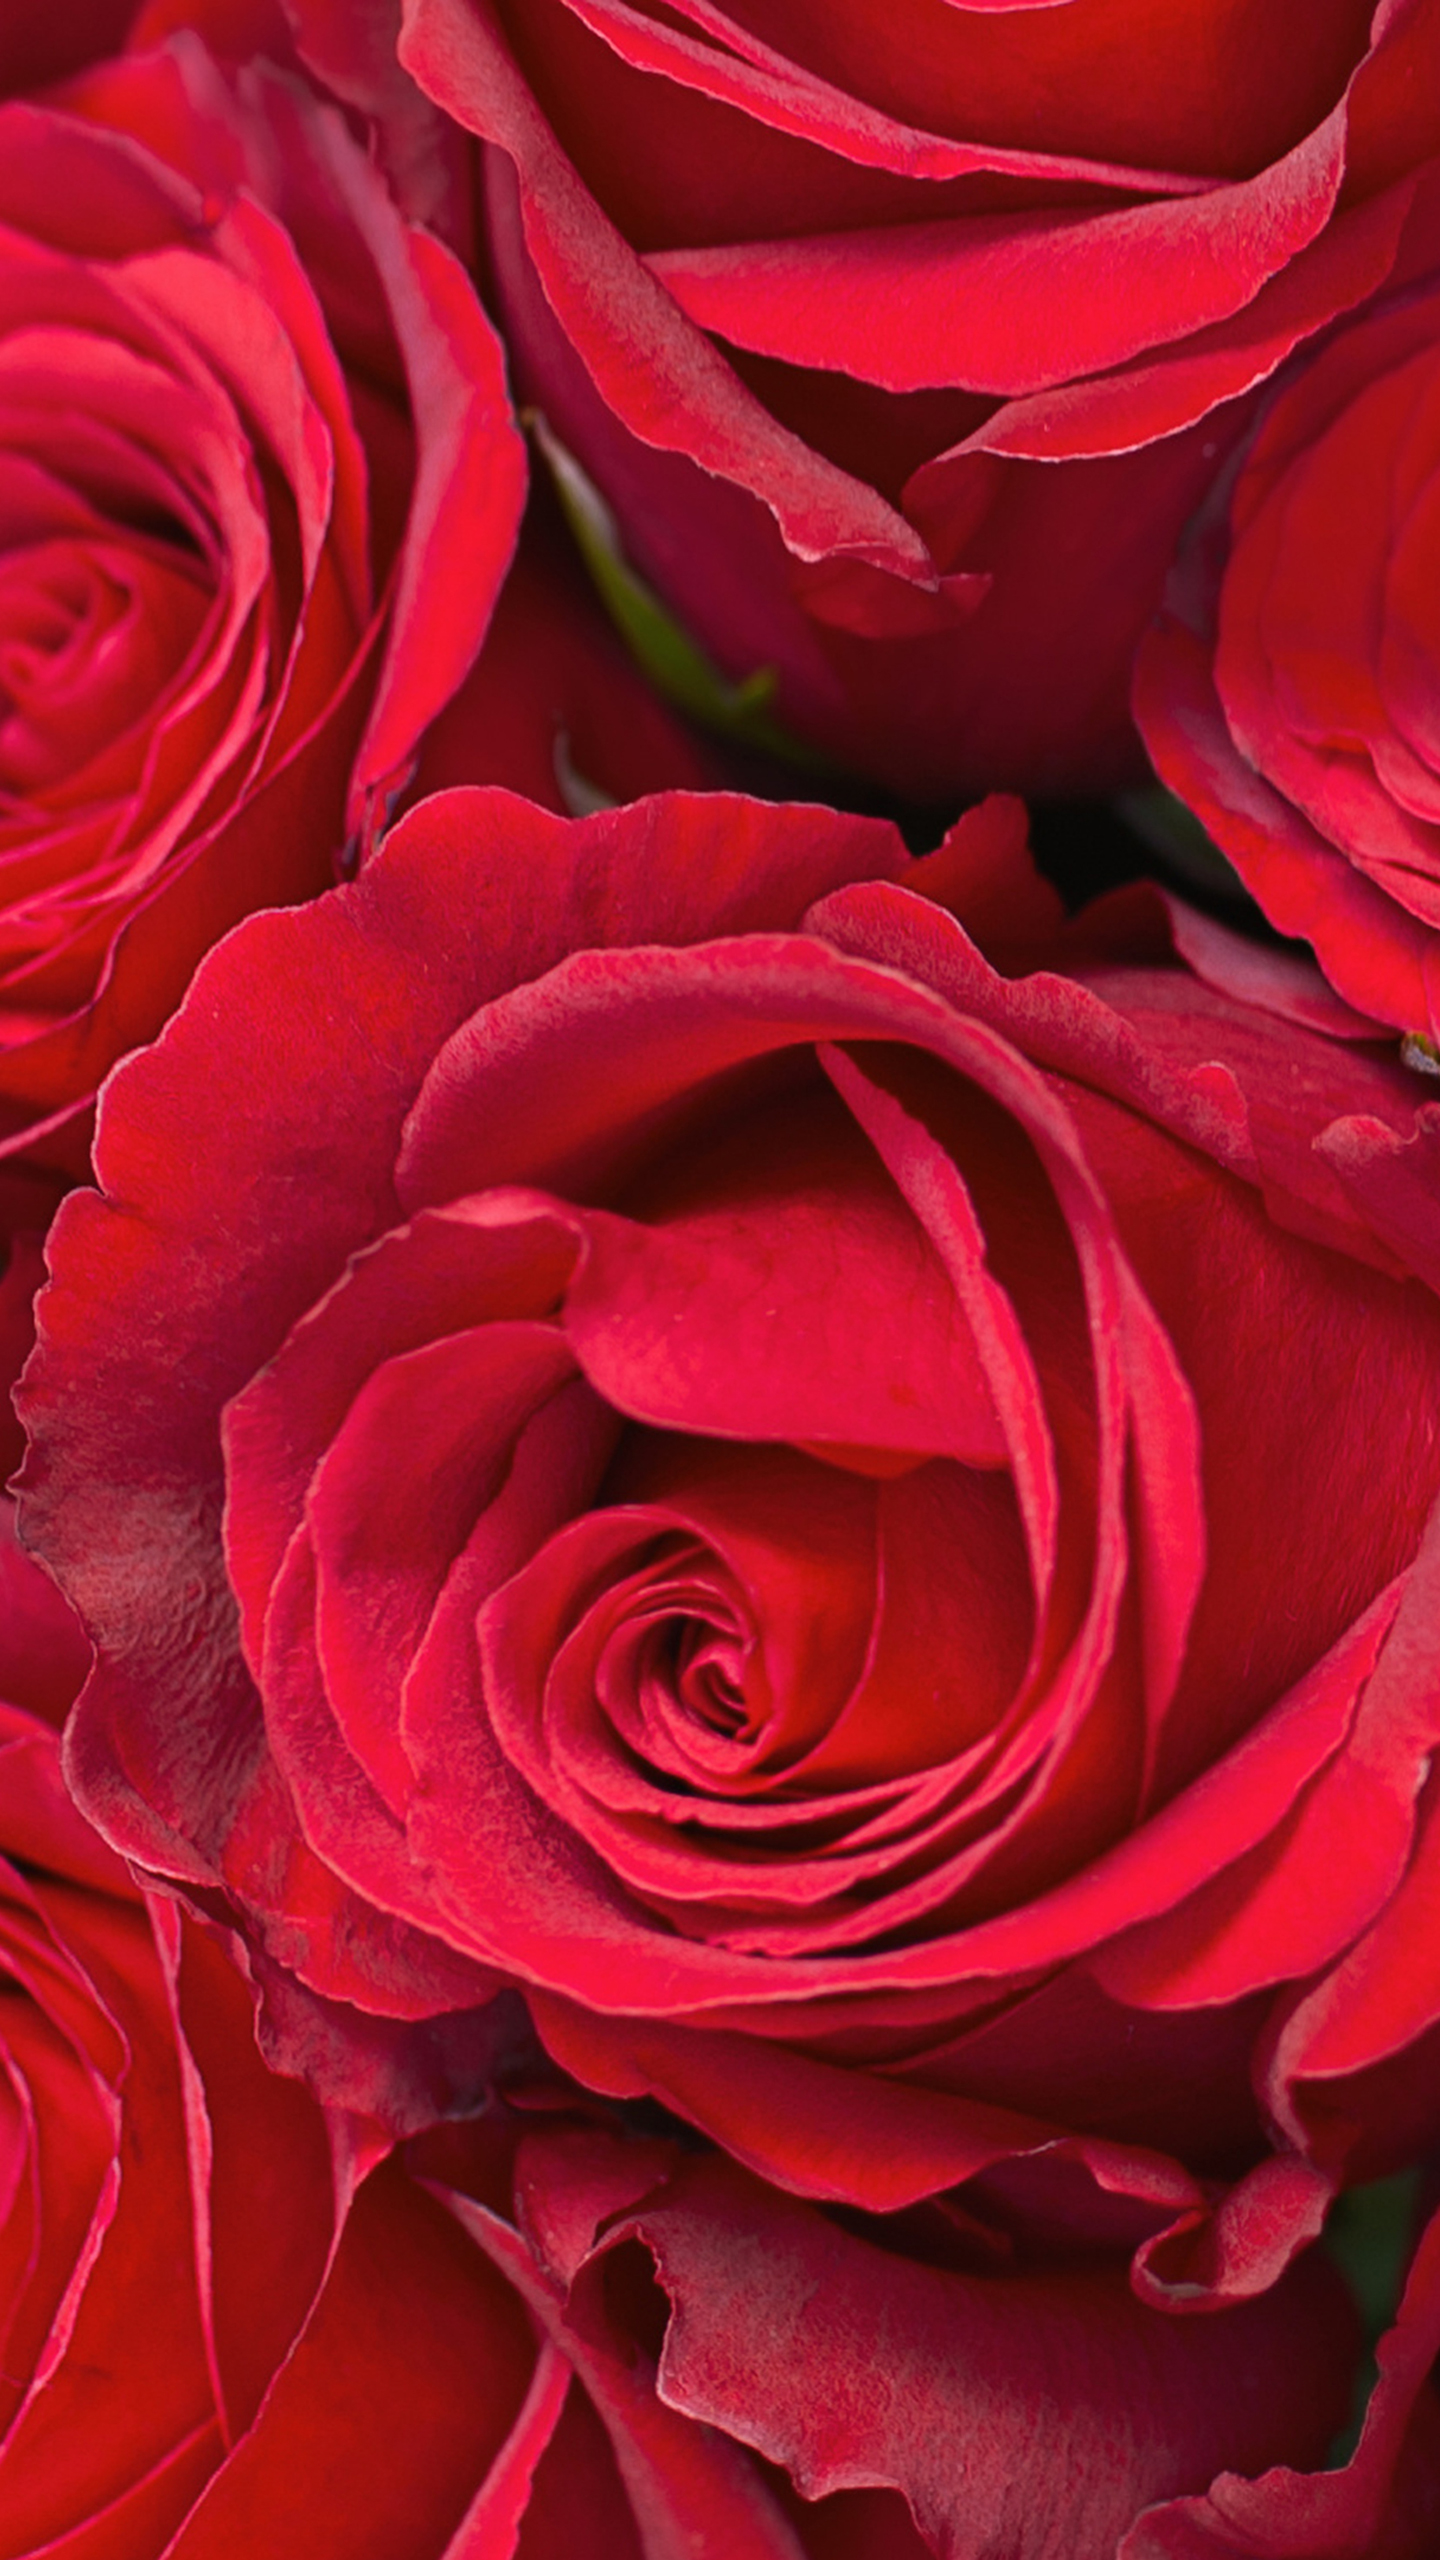 Samsung Galaxy S7 Red Roses Wallpaper Gallery Yopriceville